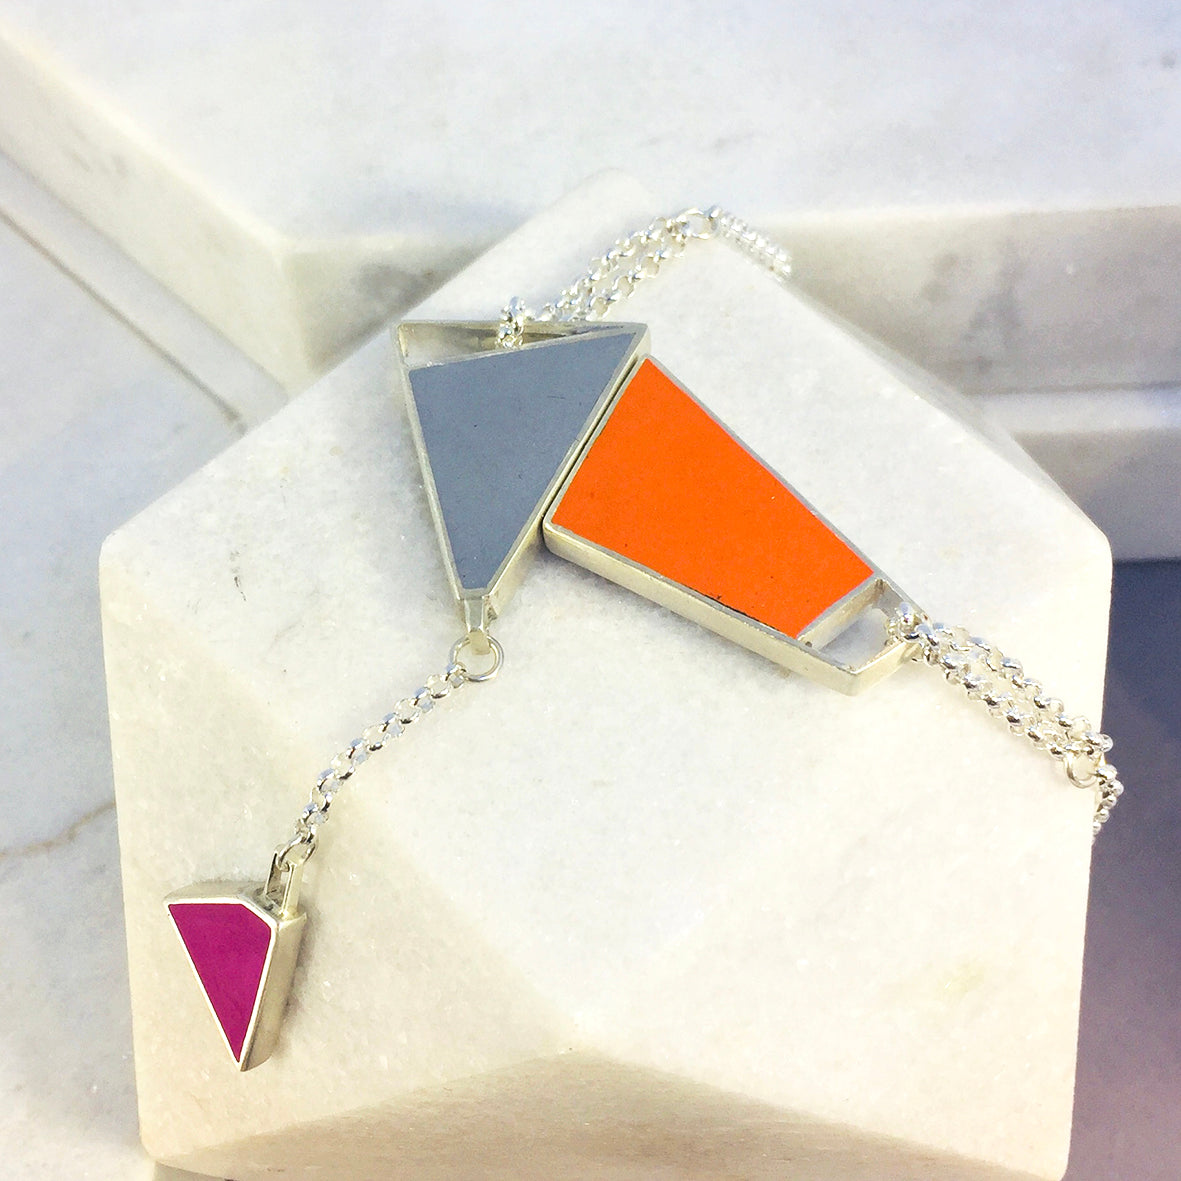 Magnetic - Reversible Necklace - 24 combinations - orange, grey, blue, green with green/pink drop